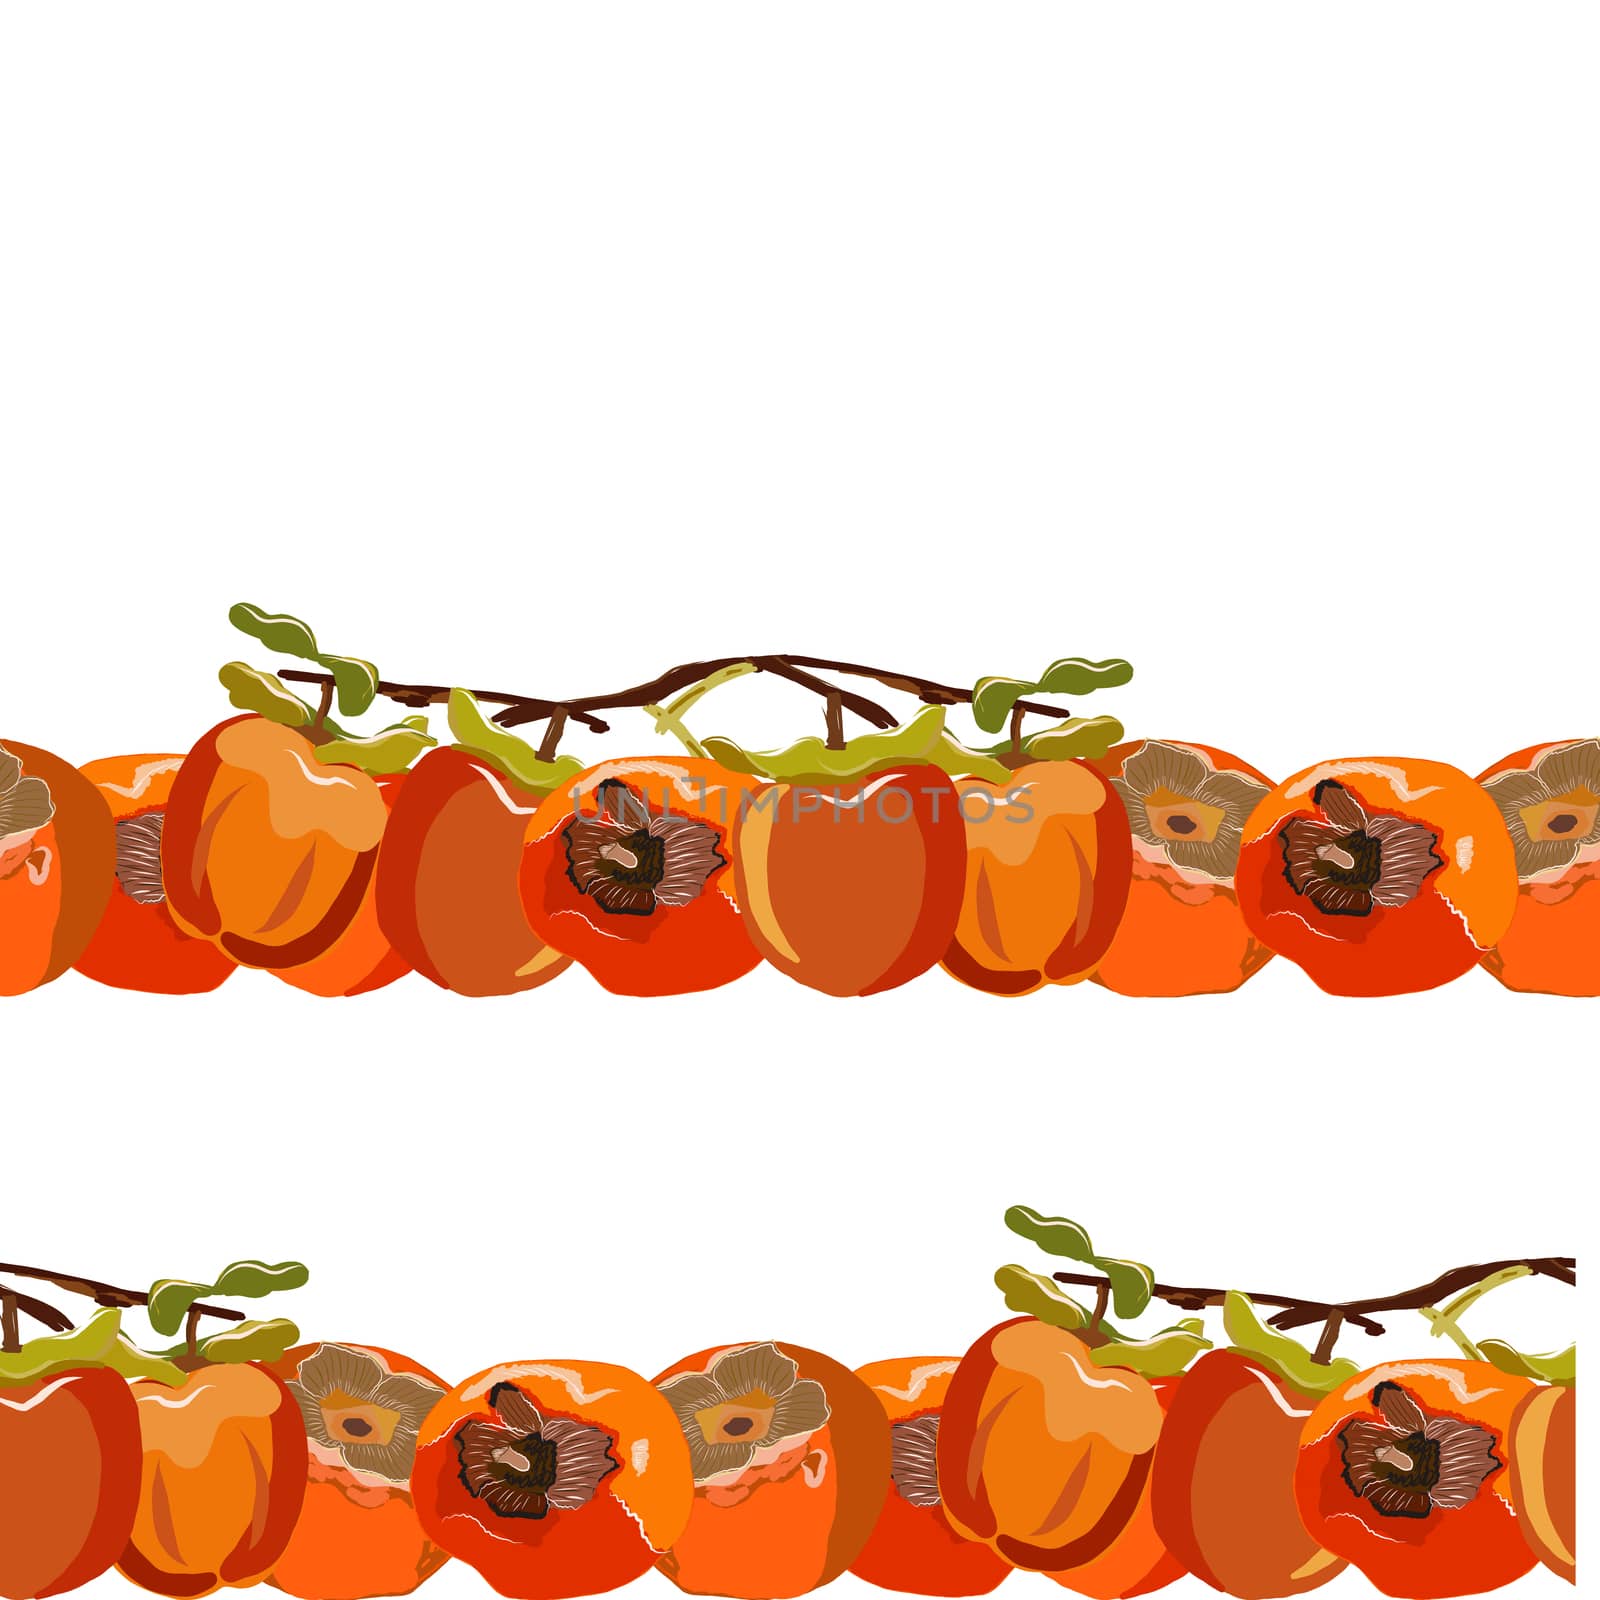 Persimmon whole with leaves seamless horizontal border vector illustration. by Nata_Prando